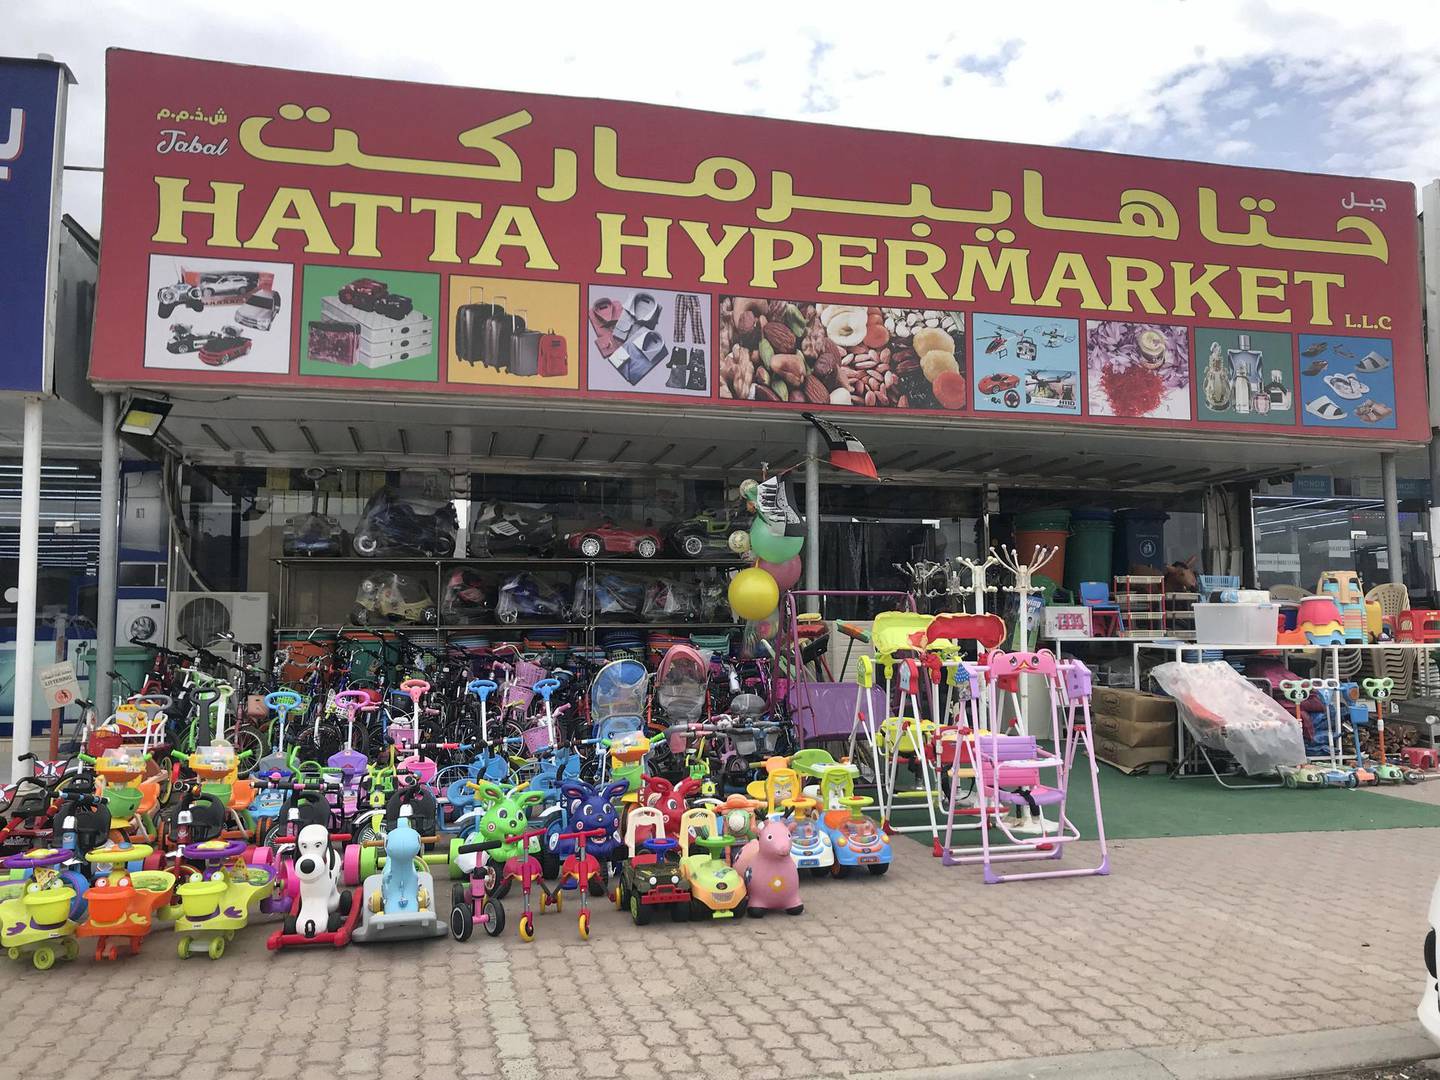 Jabal Hatta Hypermarket has an eclectic collection of things for sale including giant pool floats and souvenirs